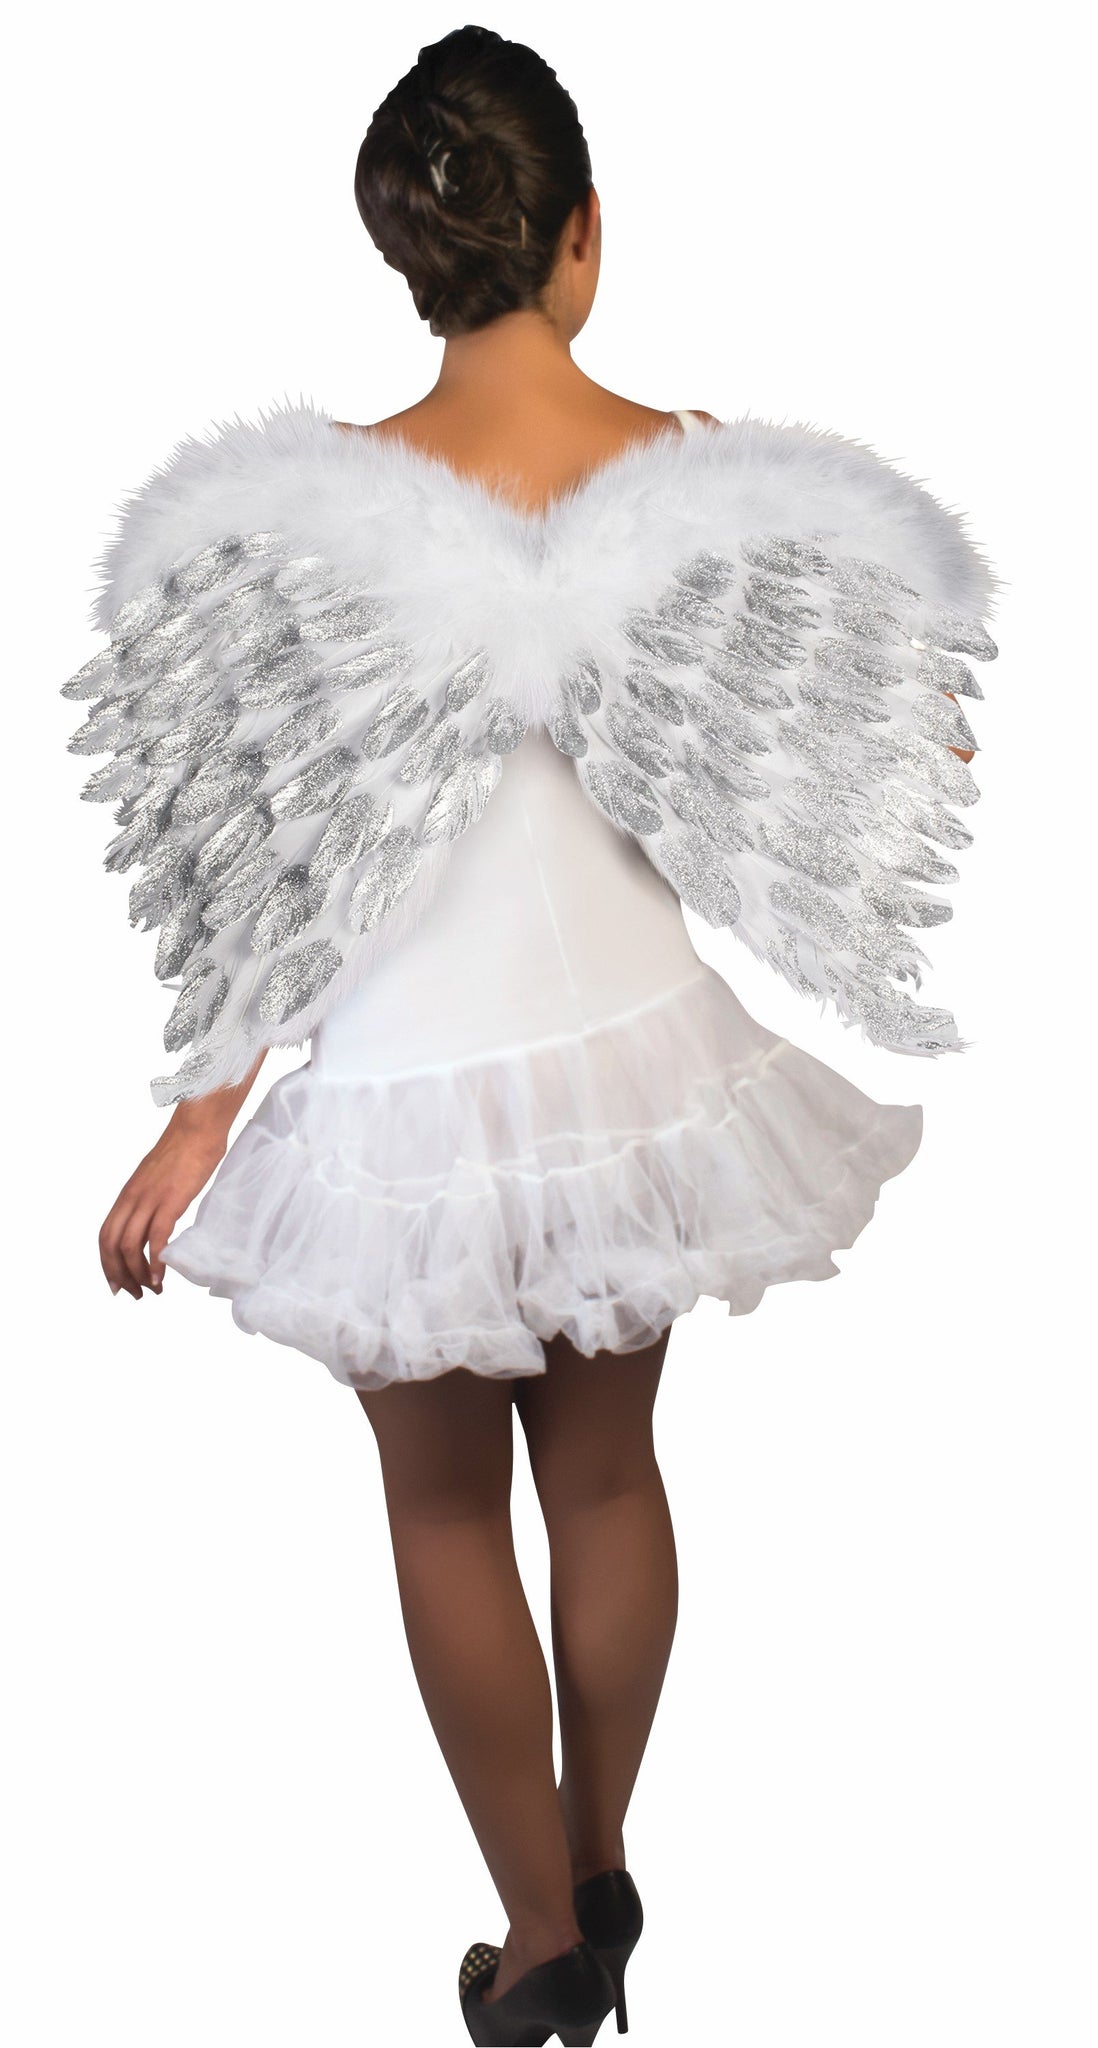 White and silver wings with feathers